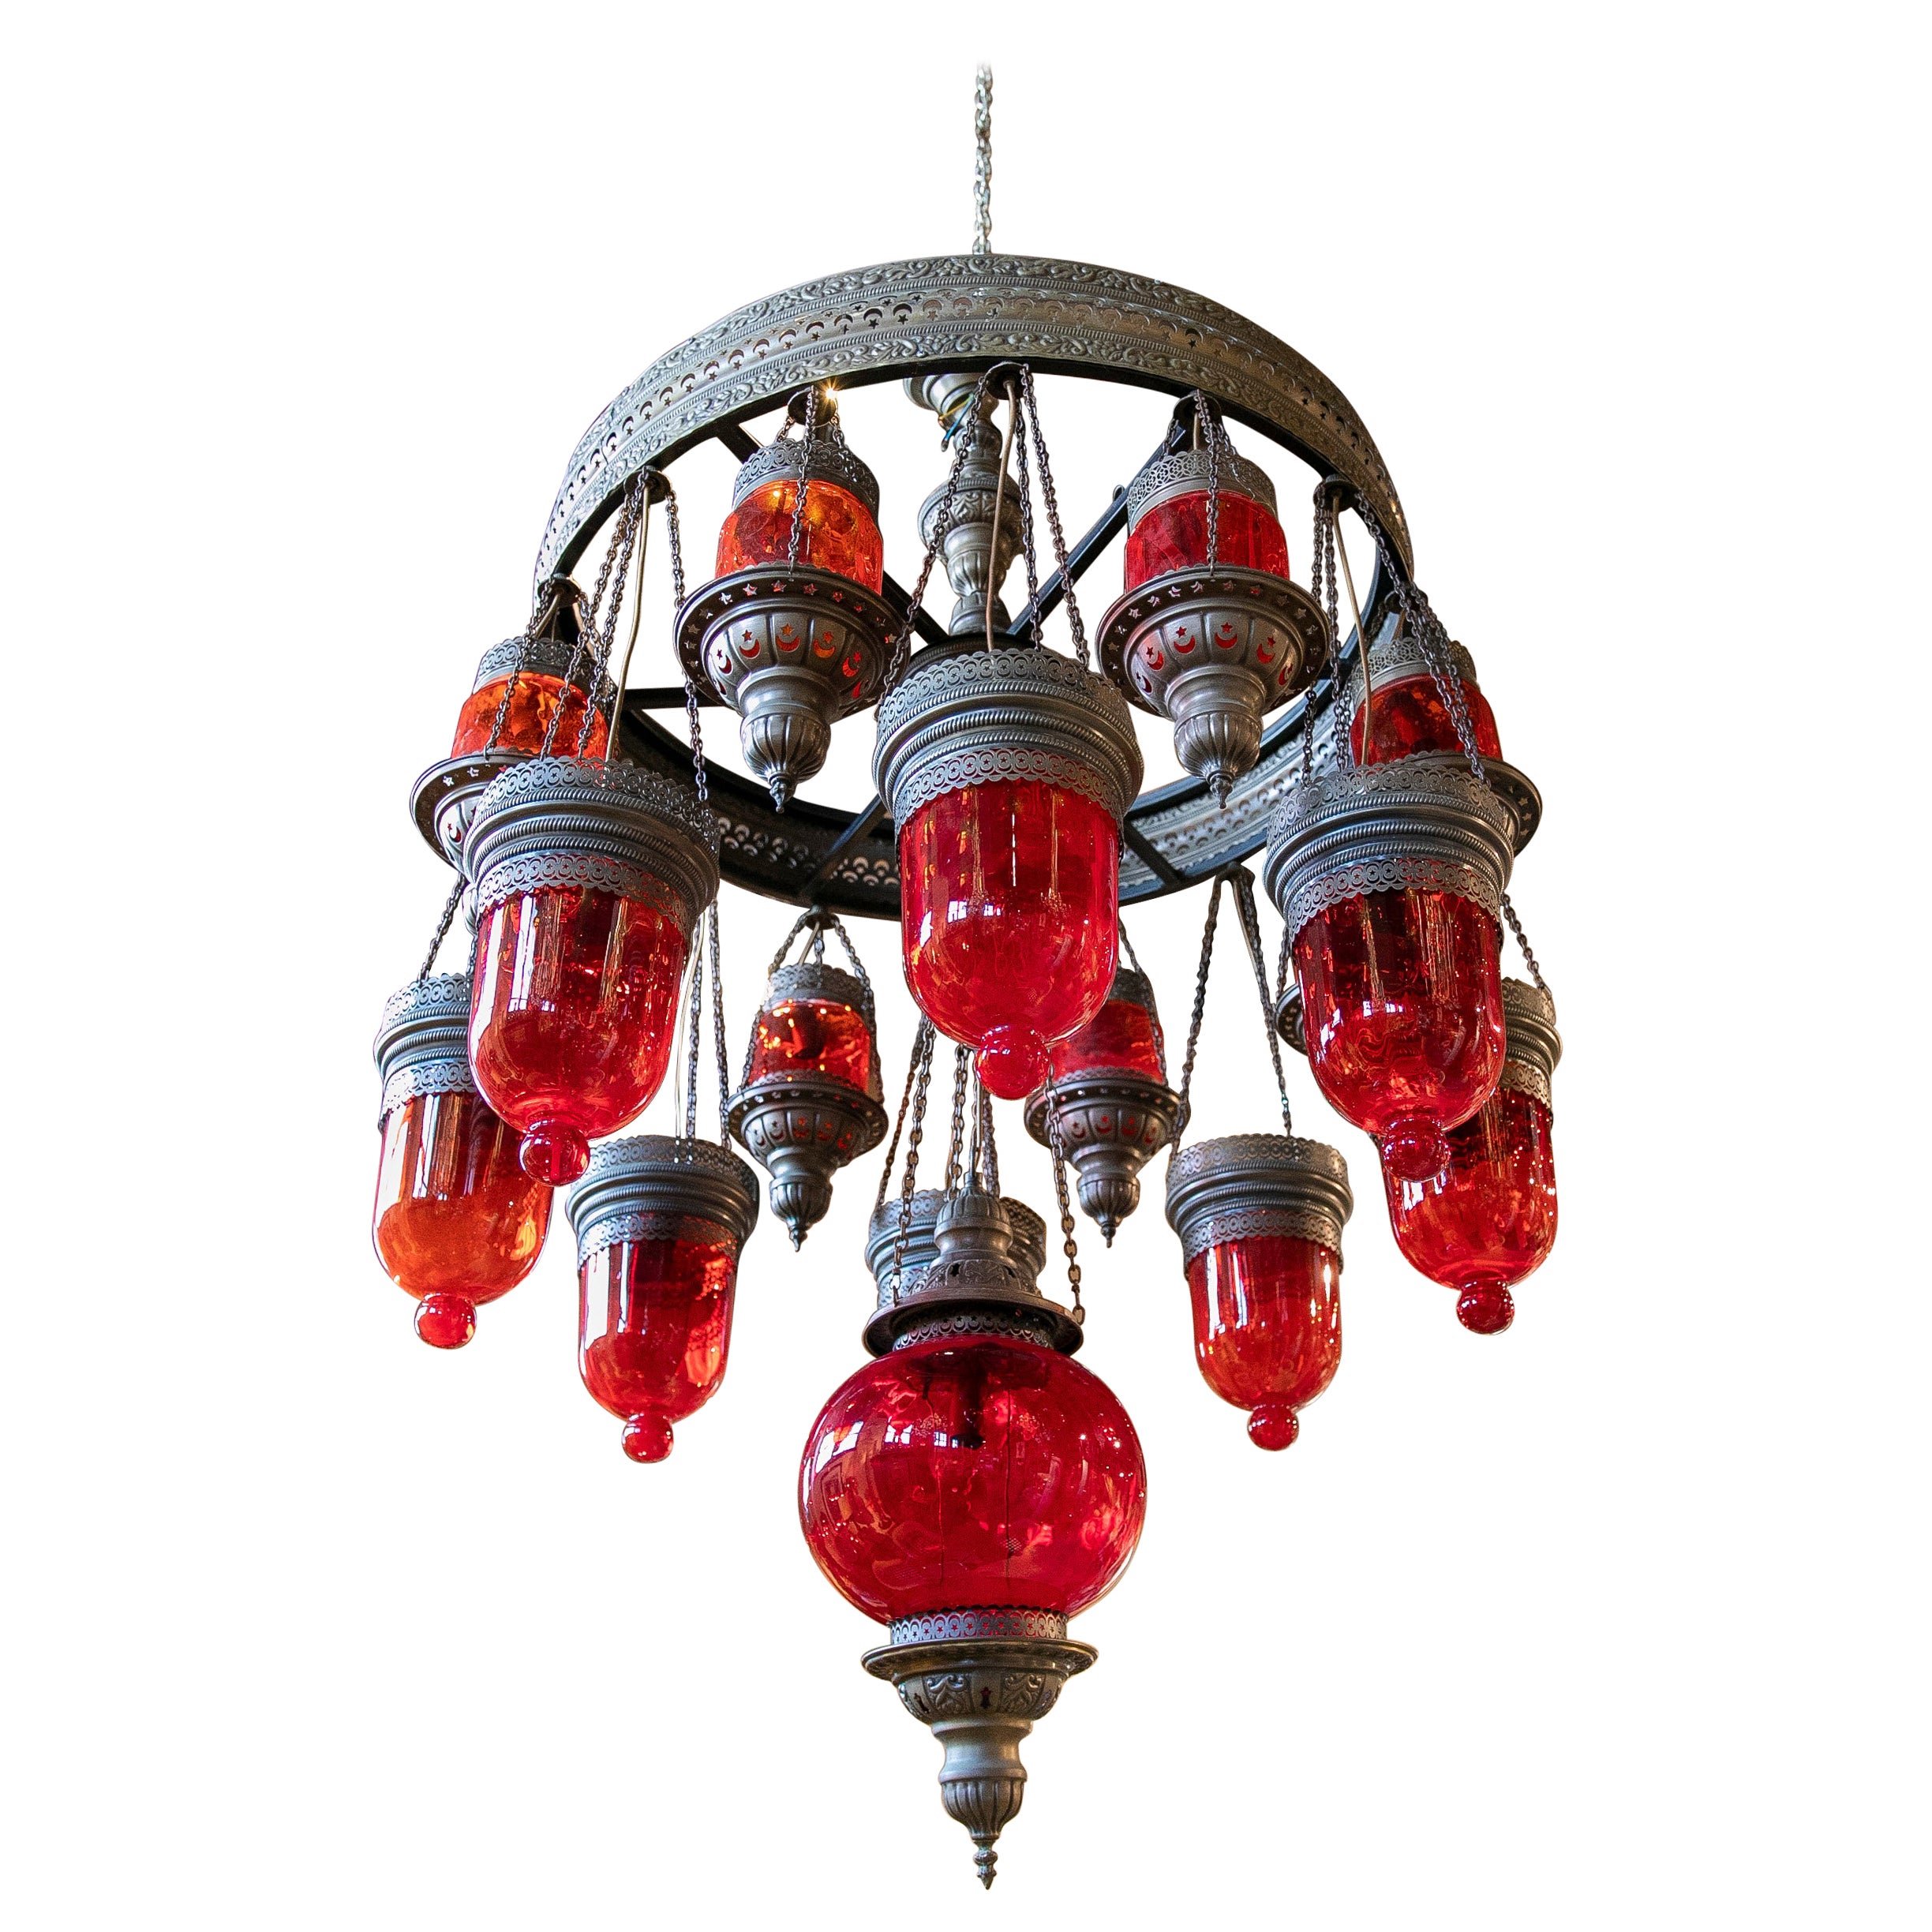 Ceiling Lamp Made of Metal, Iron and Decorative Glass in Red Colour